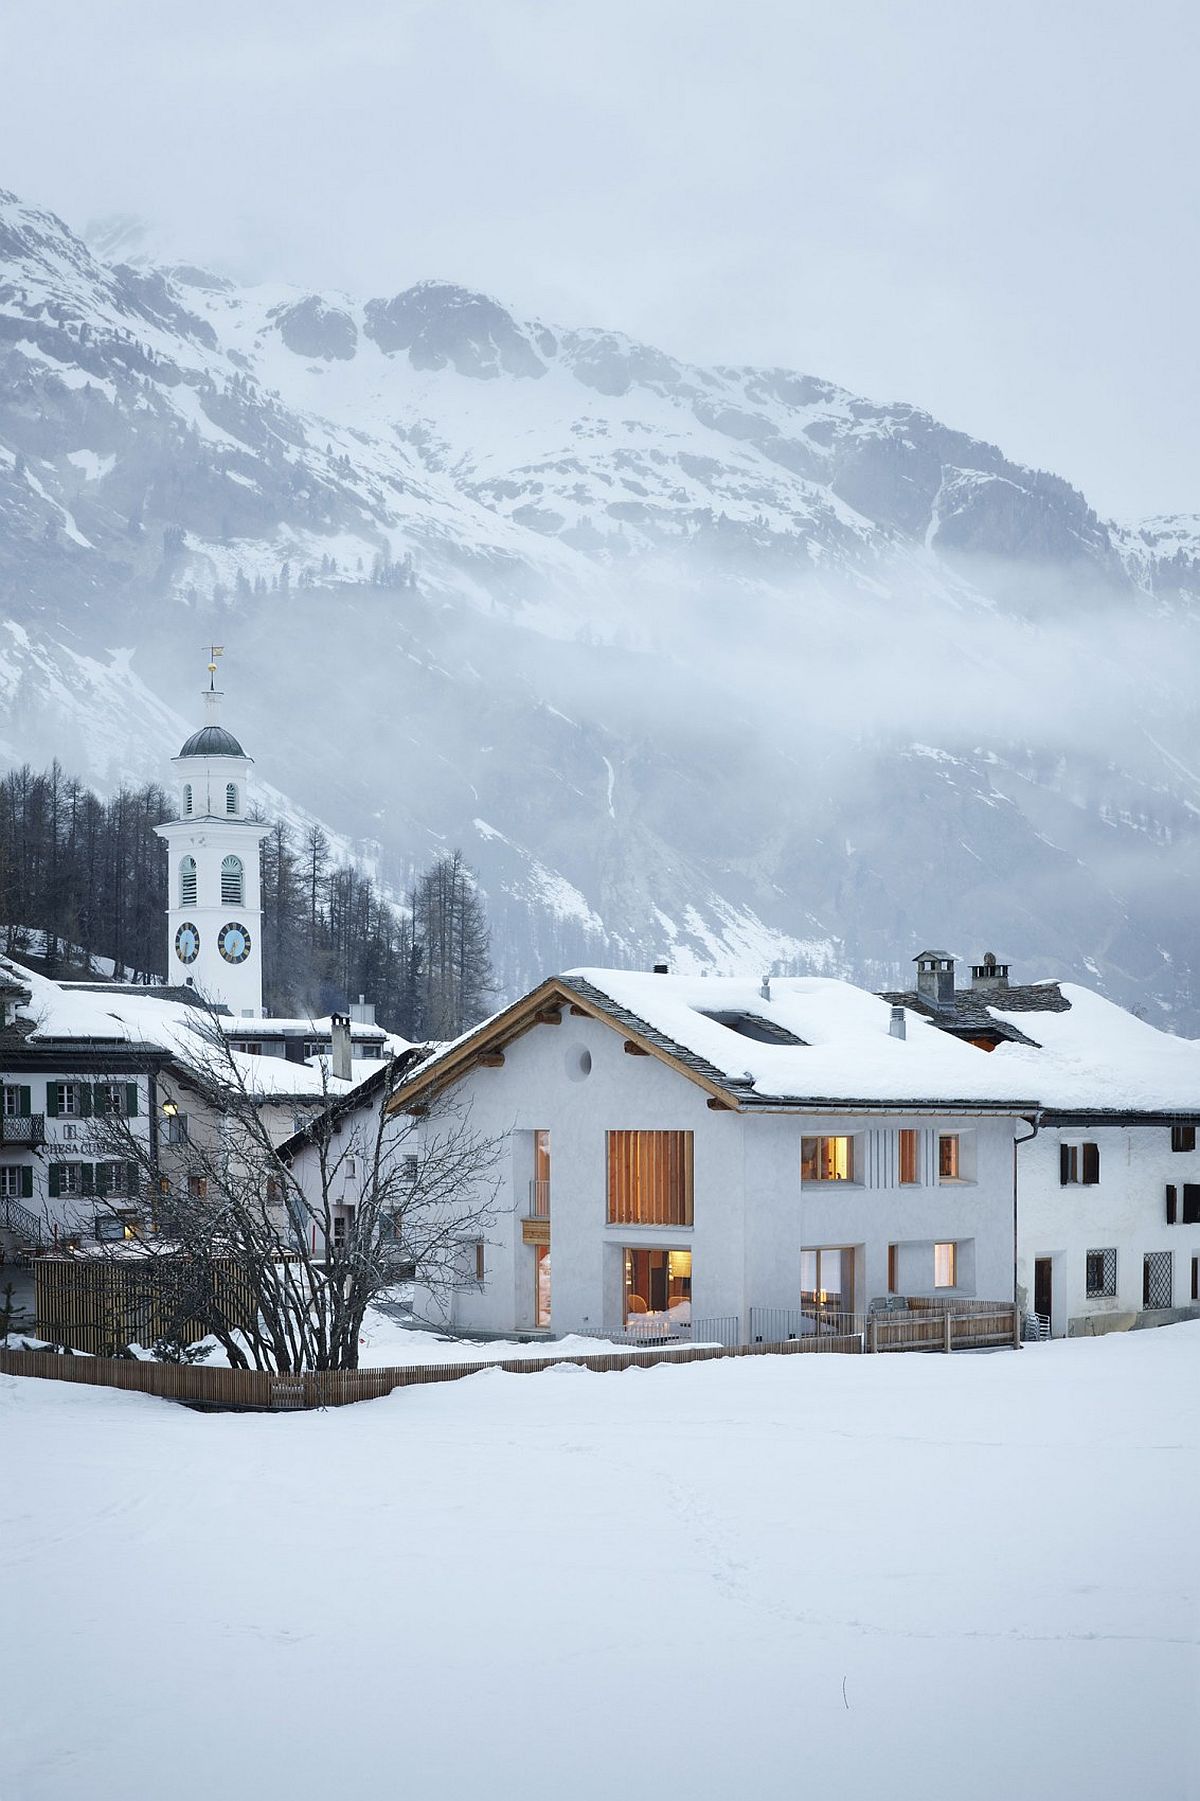 Former barn house in village sqaure turned into a lovely contemporary home in Sils im Engadin, Switzerland